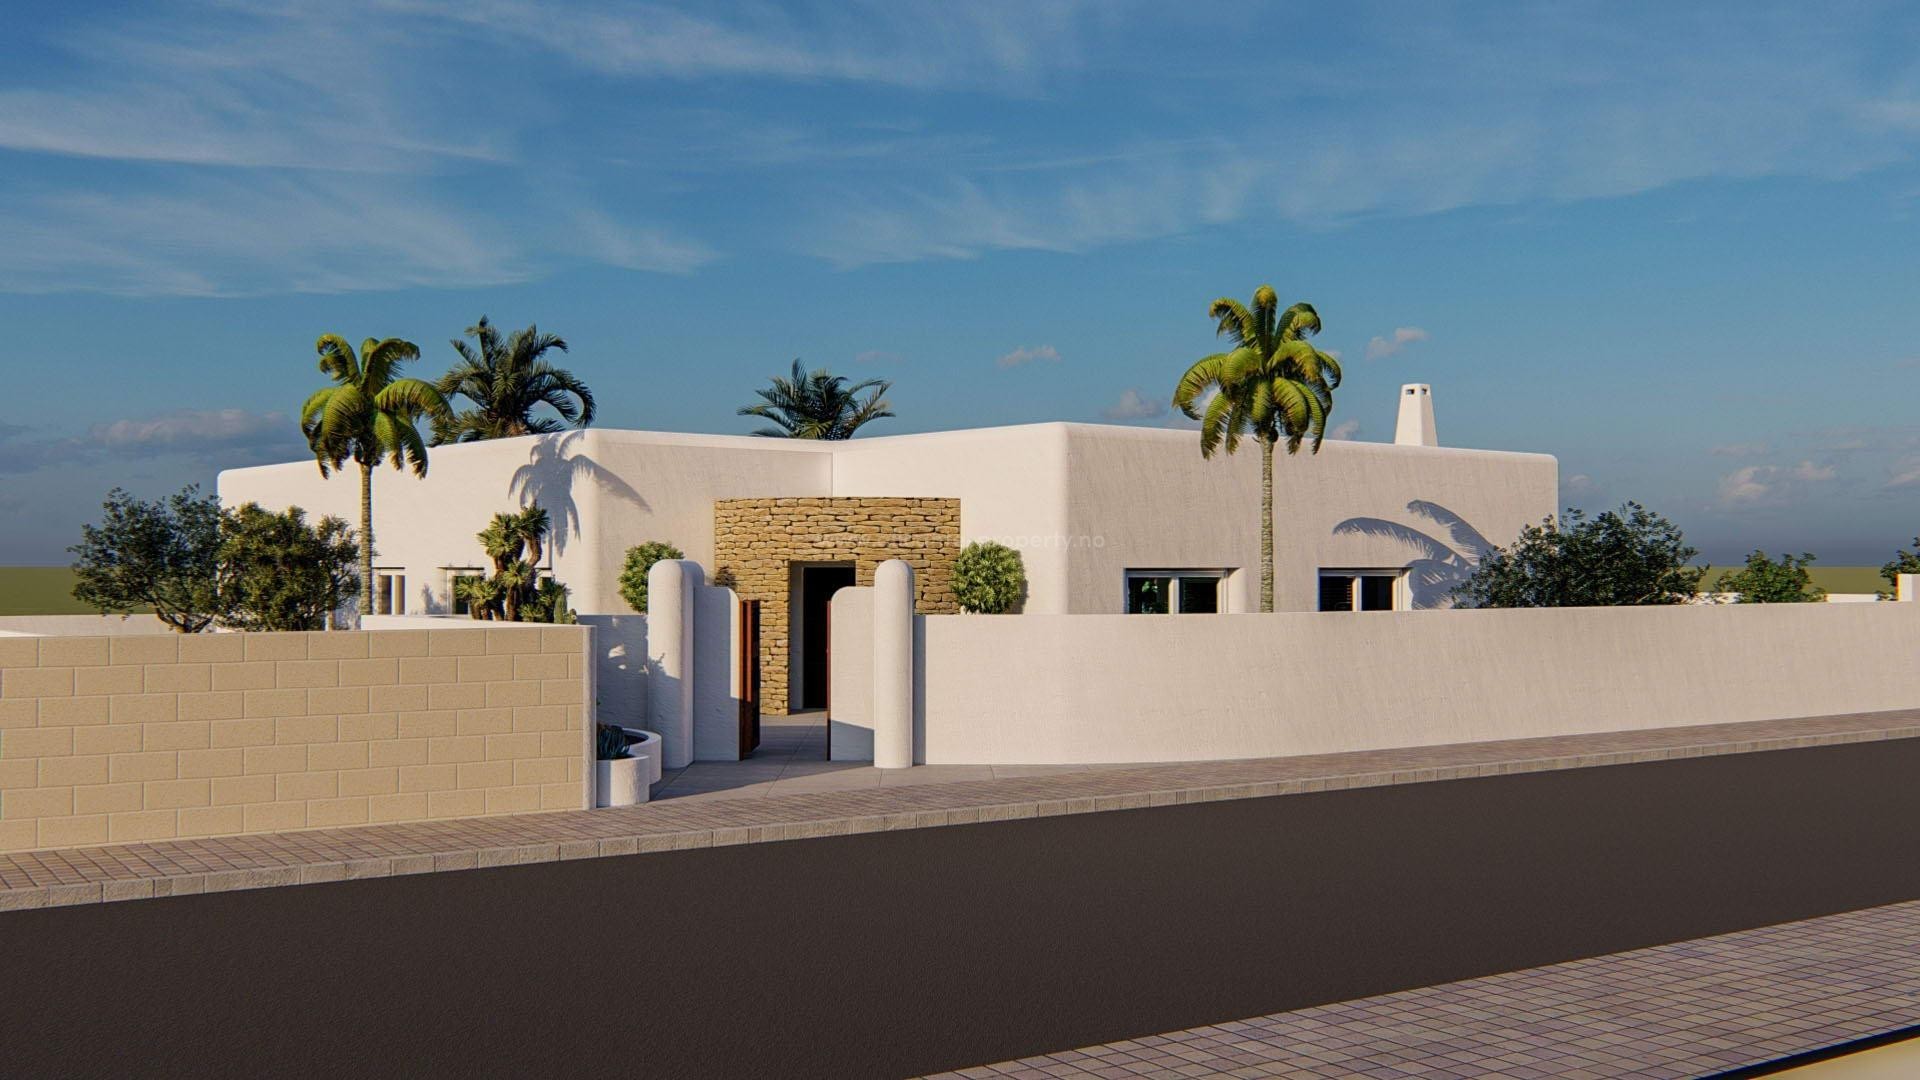 Exclusive house/villa in Ibiza style in Alfaz del Pi, 4 bedrooms, 2 bathrooms, large terrace with pool area facing south.